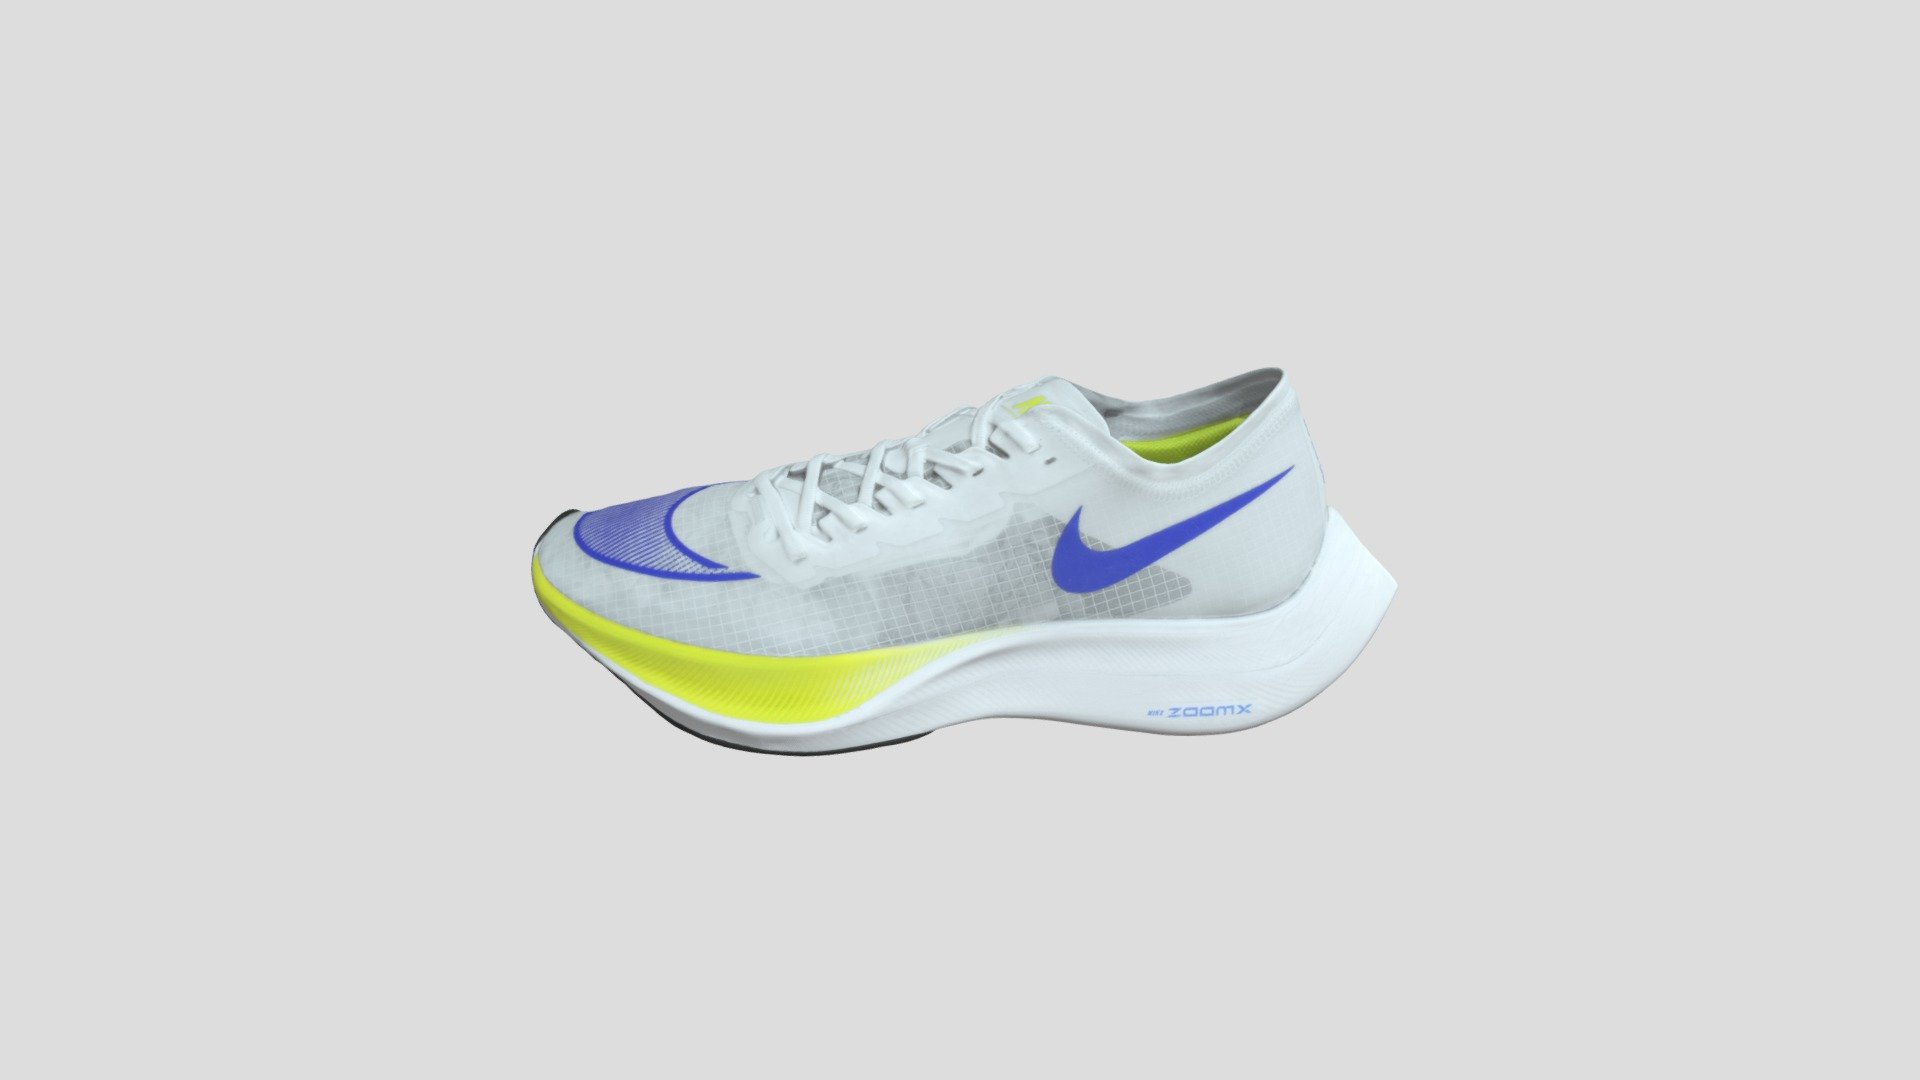 This model was created firstly by 3D scanning on retail version, and then being detail-improved manually, thus a 1:1 repulica of the original
PBR ready
Low-poly
4K texture
Welcome to check out other models we have to offer. And we do accept custom orders as well :) - Nike ZoomX Vaporfly Next% 白蓝绿_AO4568-103 - Buy Royalty Free 3D model by TRARGUS 3d model